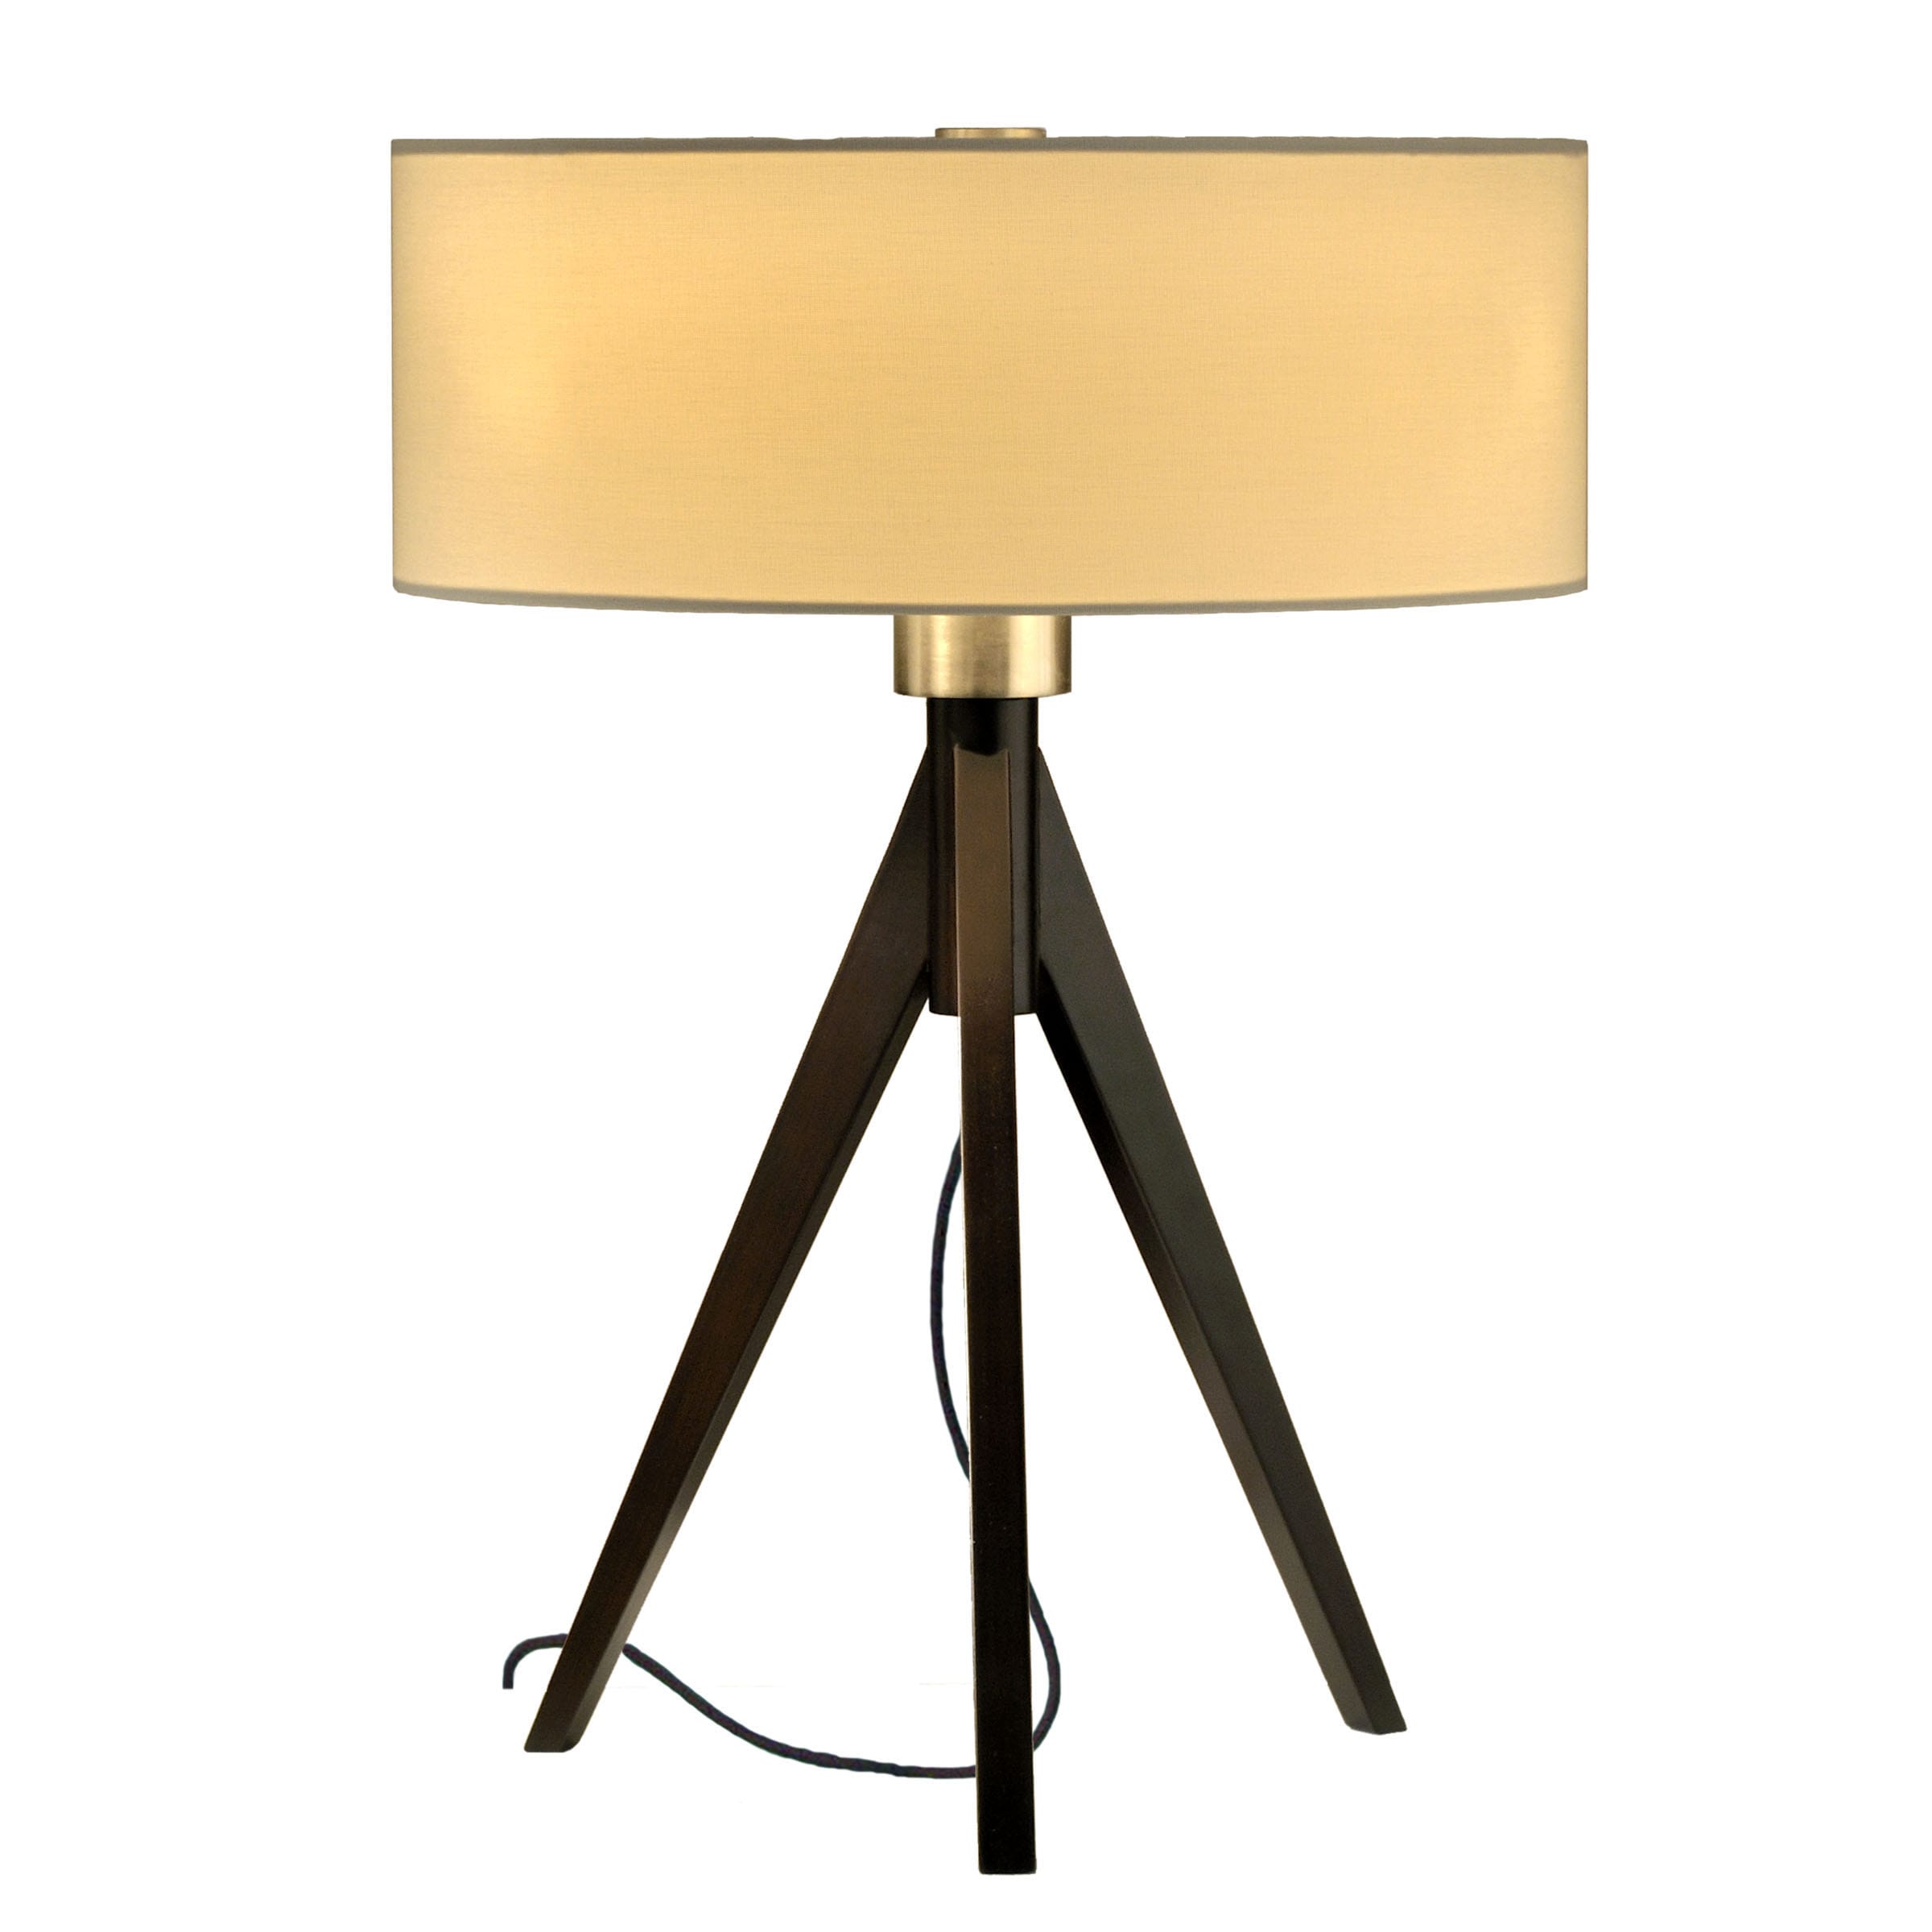 Shop Tripod Table Lamp - Free Shipping Today - Overstock.com - 7547412